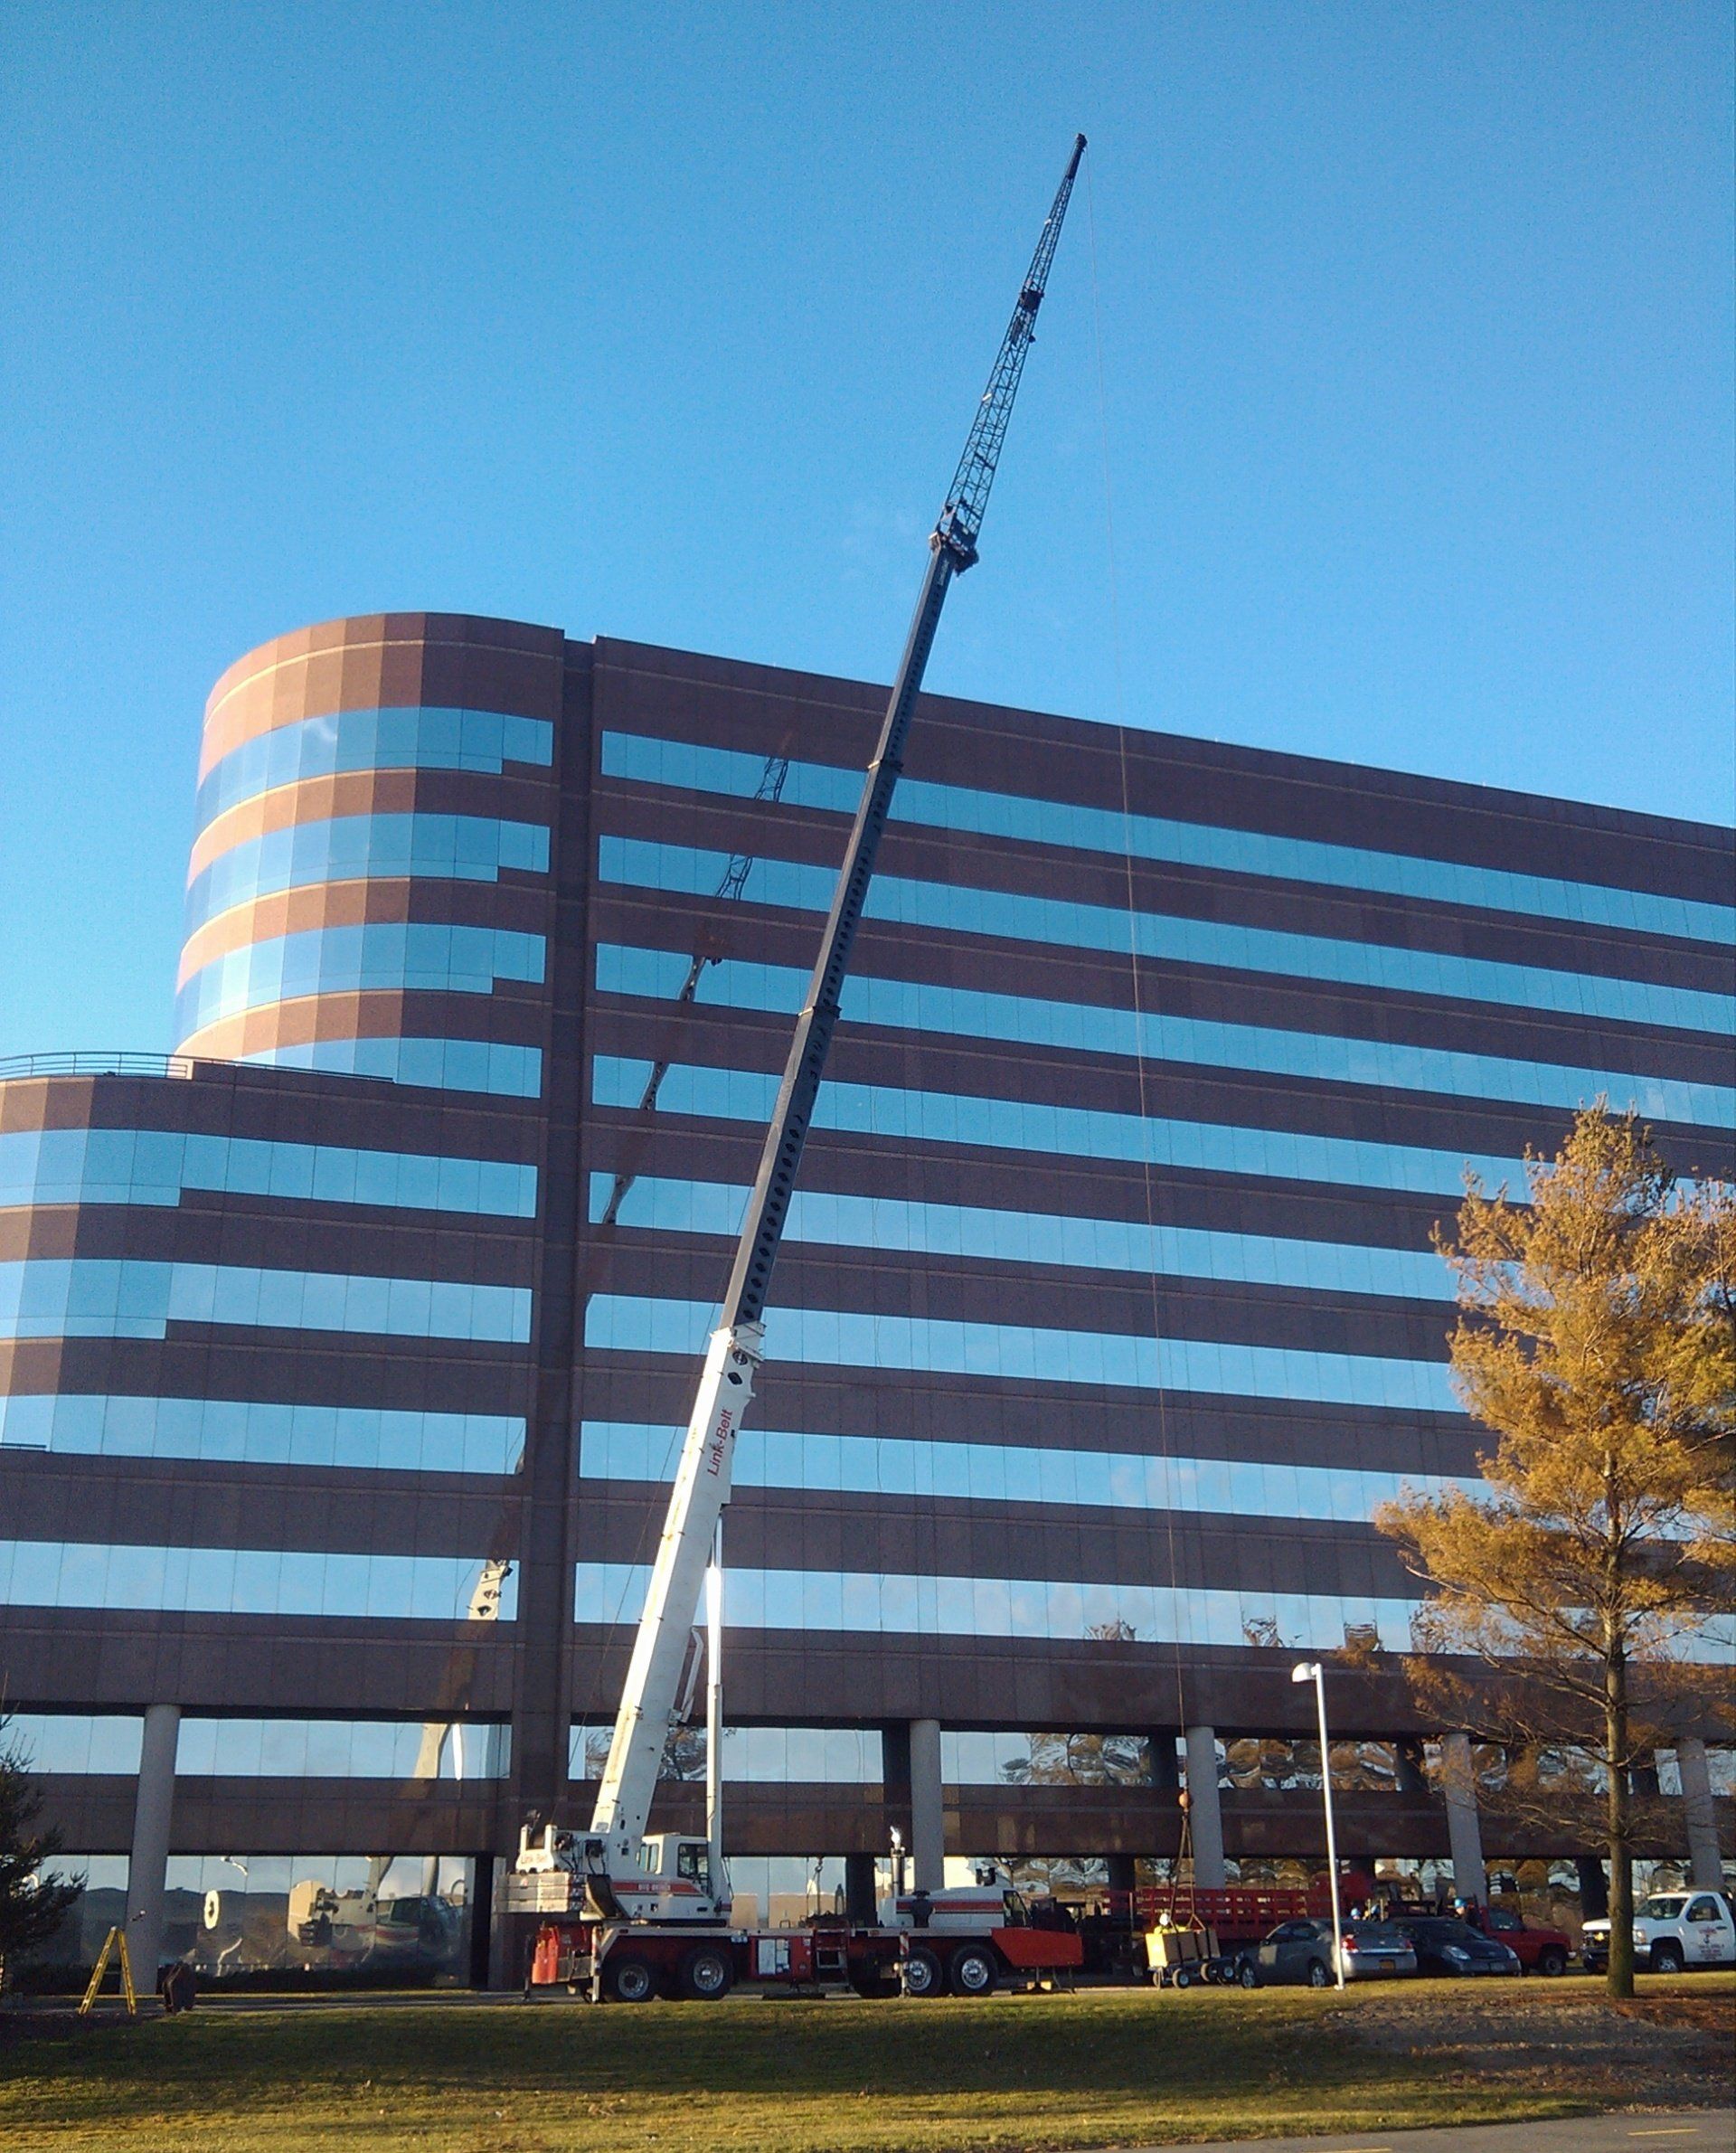 70 Ton Linkbelt Setting Rooftop Equipment On A 120' High Office Building in Uniondale